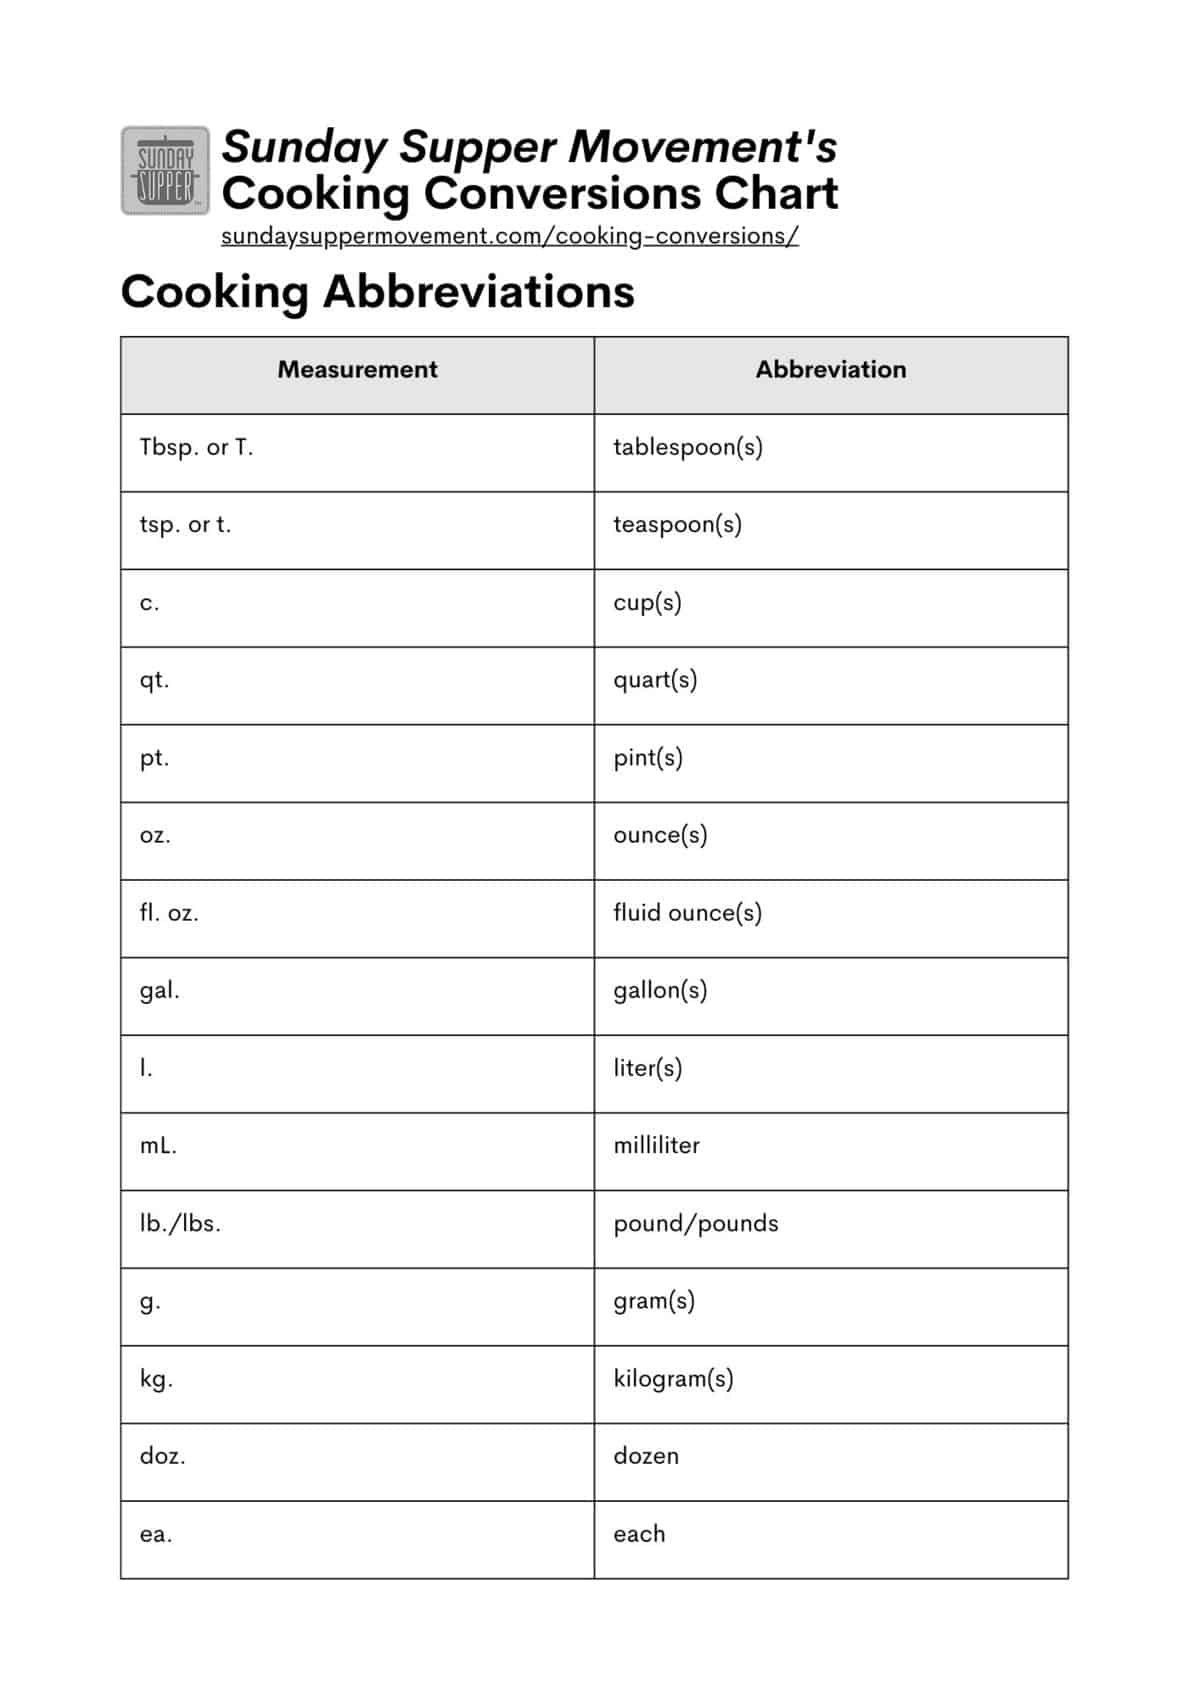 preview of printable cooking conversions chart showing first page with cooking measurement abbreviations